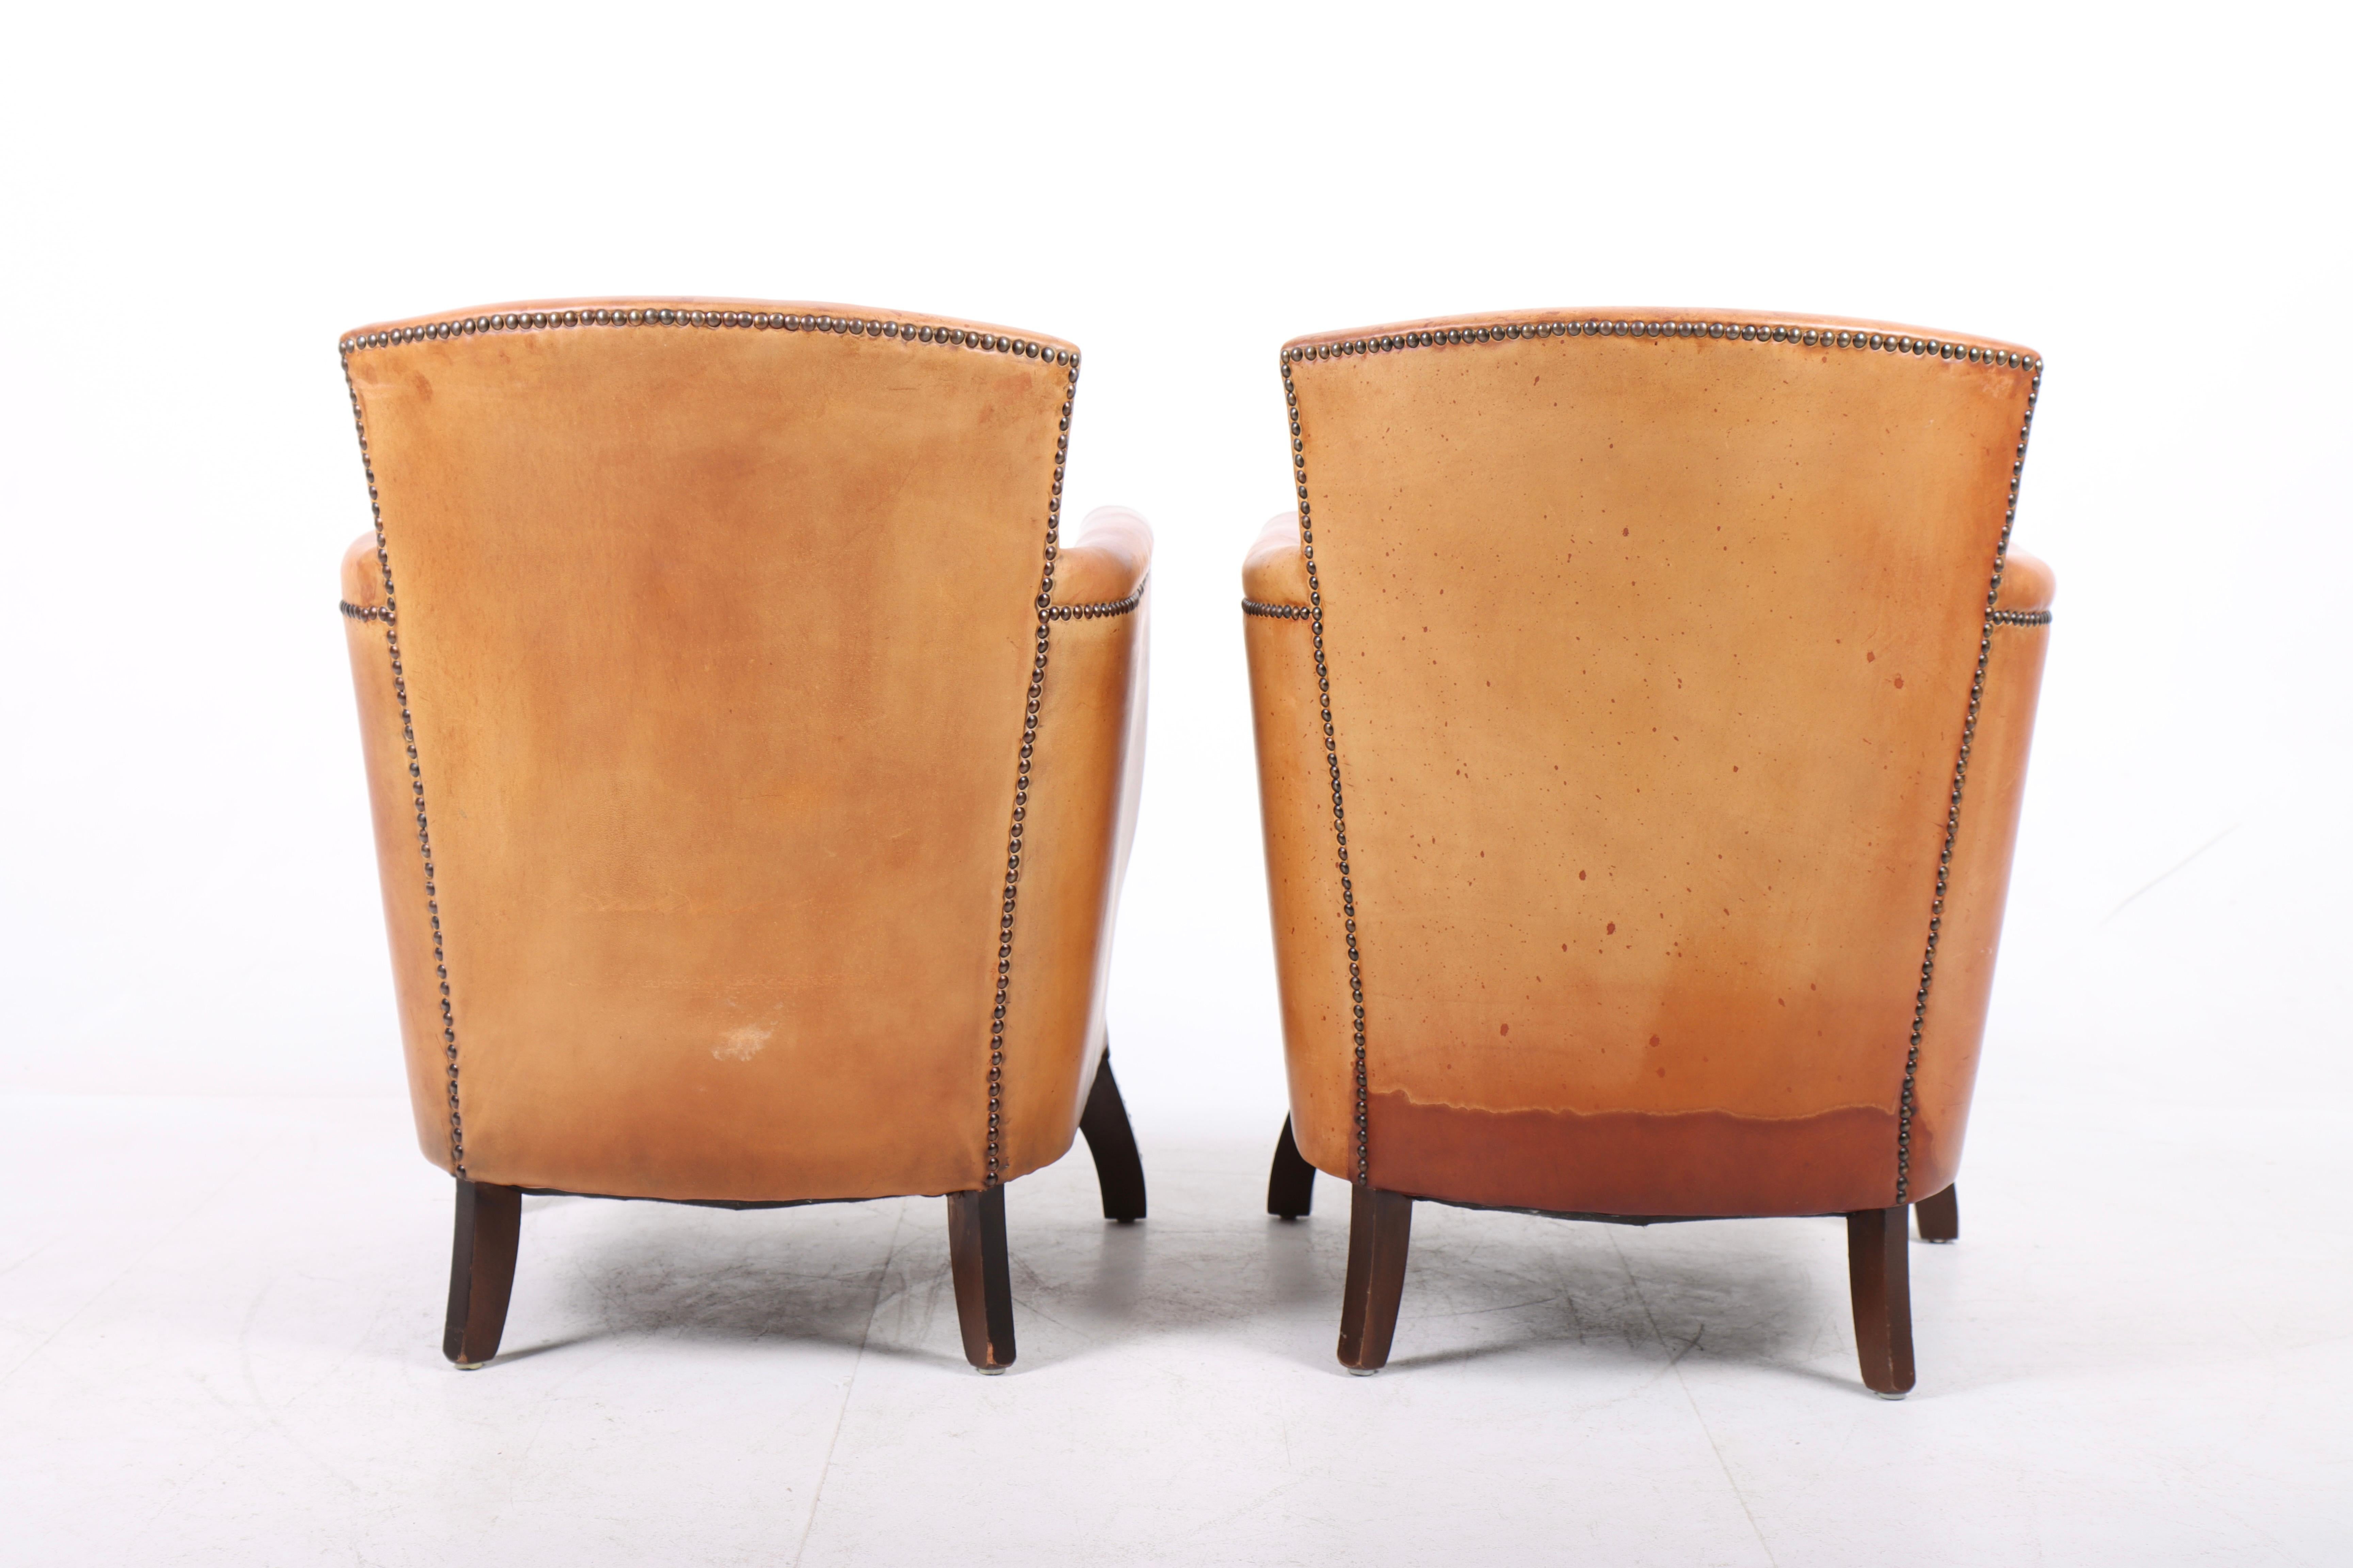 Pair of Lounge Chairs in Patinated Leather and Fabric, Designed by Otto Schulz 1